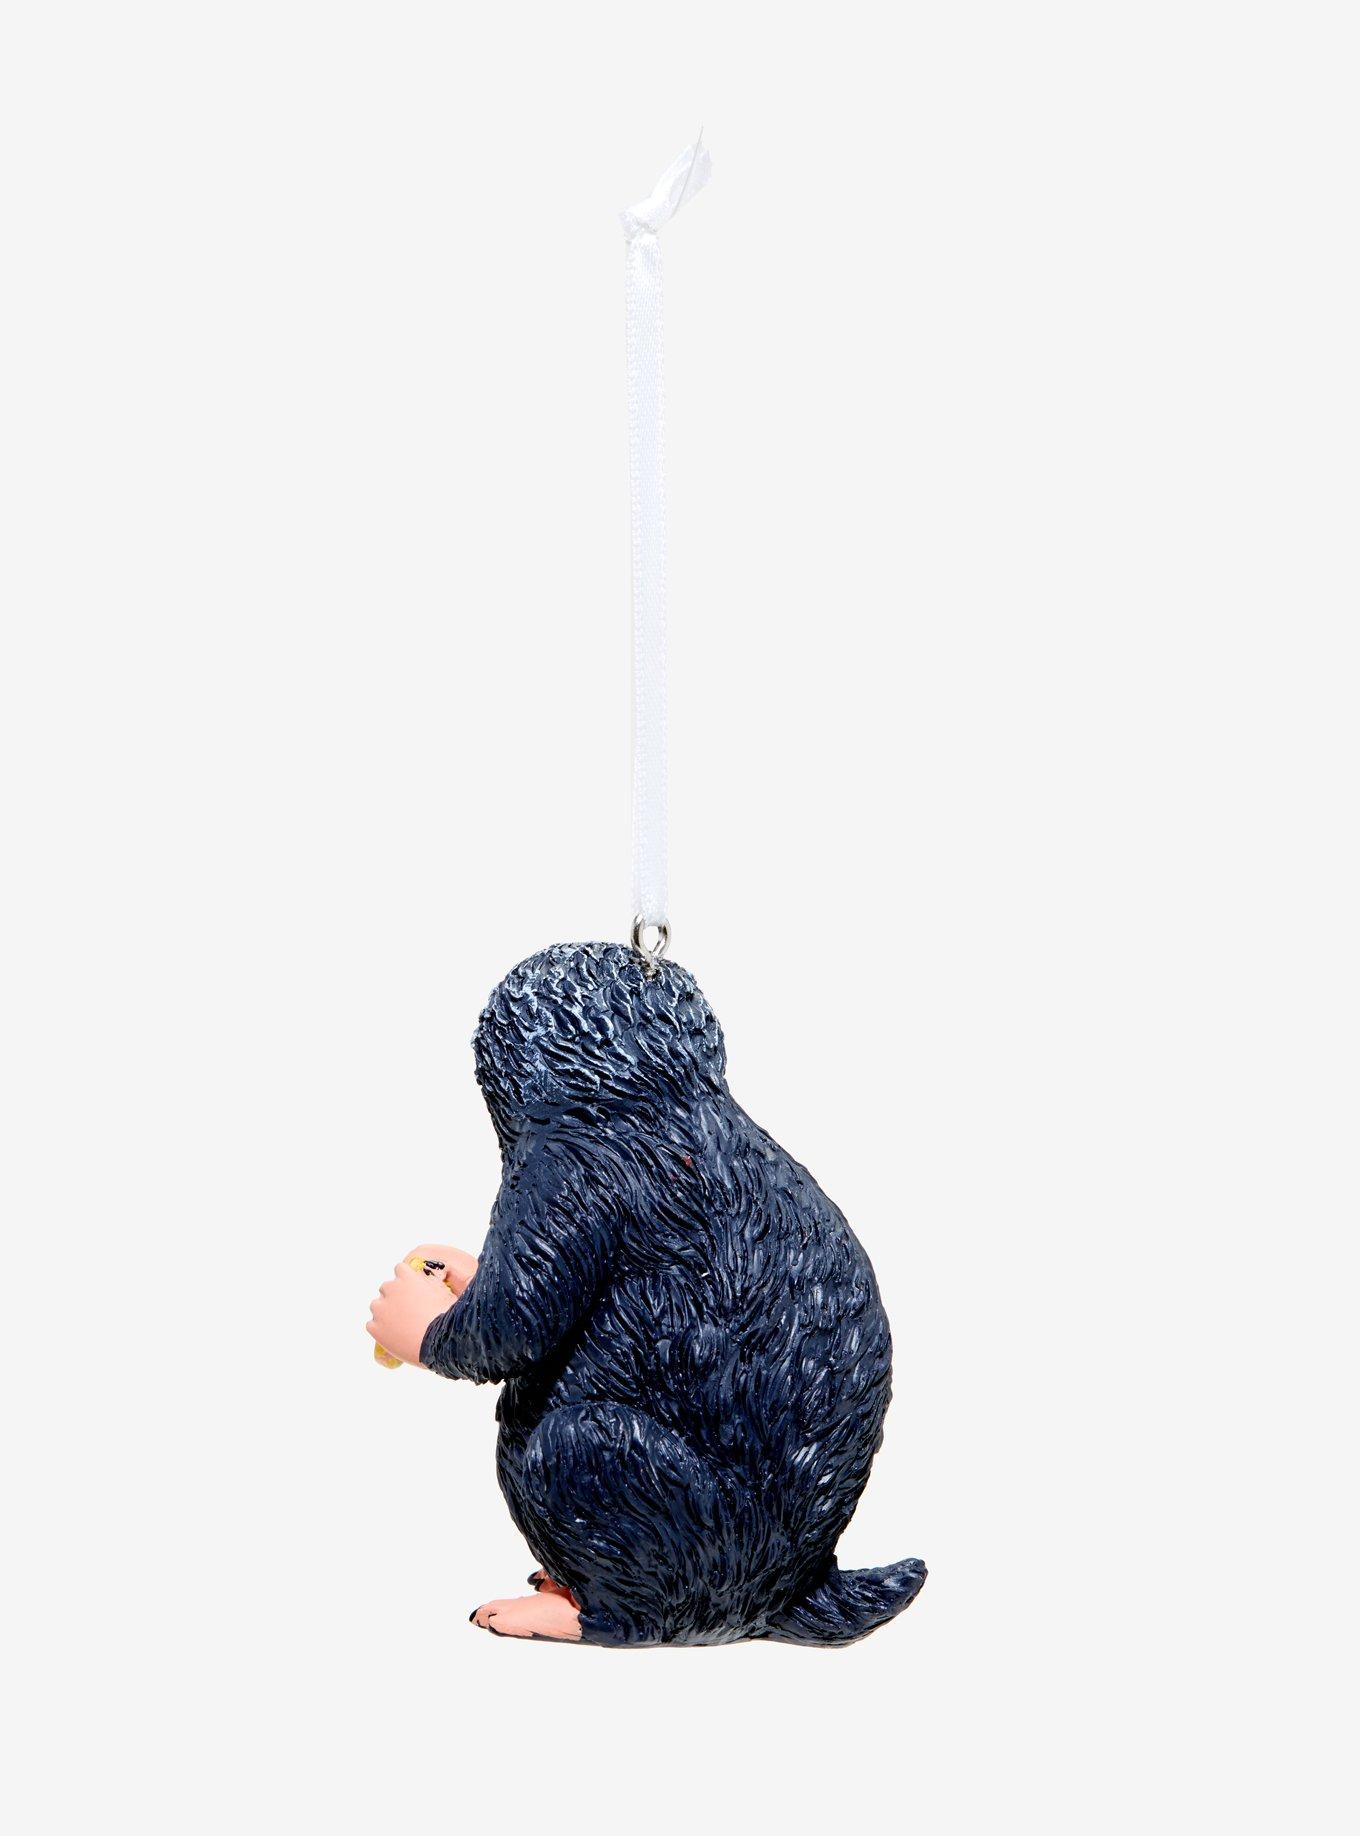 Fantastic Beasts And Where To Find Them Niffler Ornament, , alternate